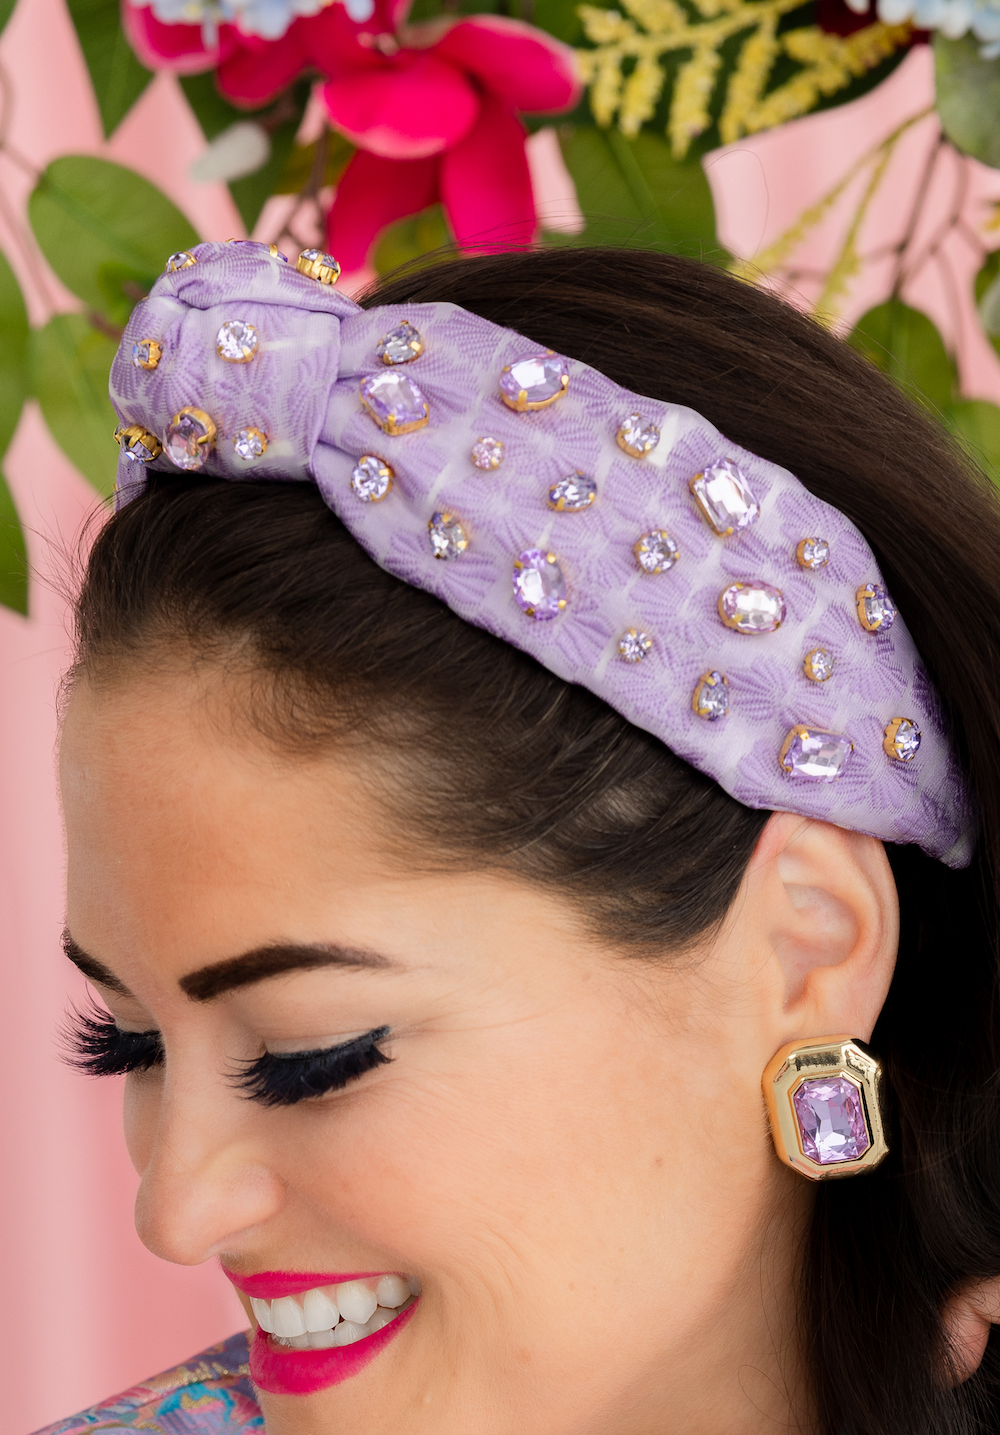 Adult Size Lavender Textured Headband with Crystals